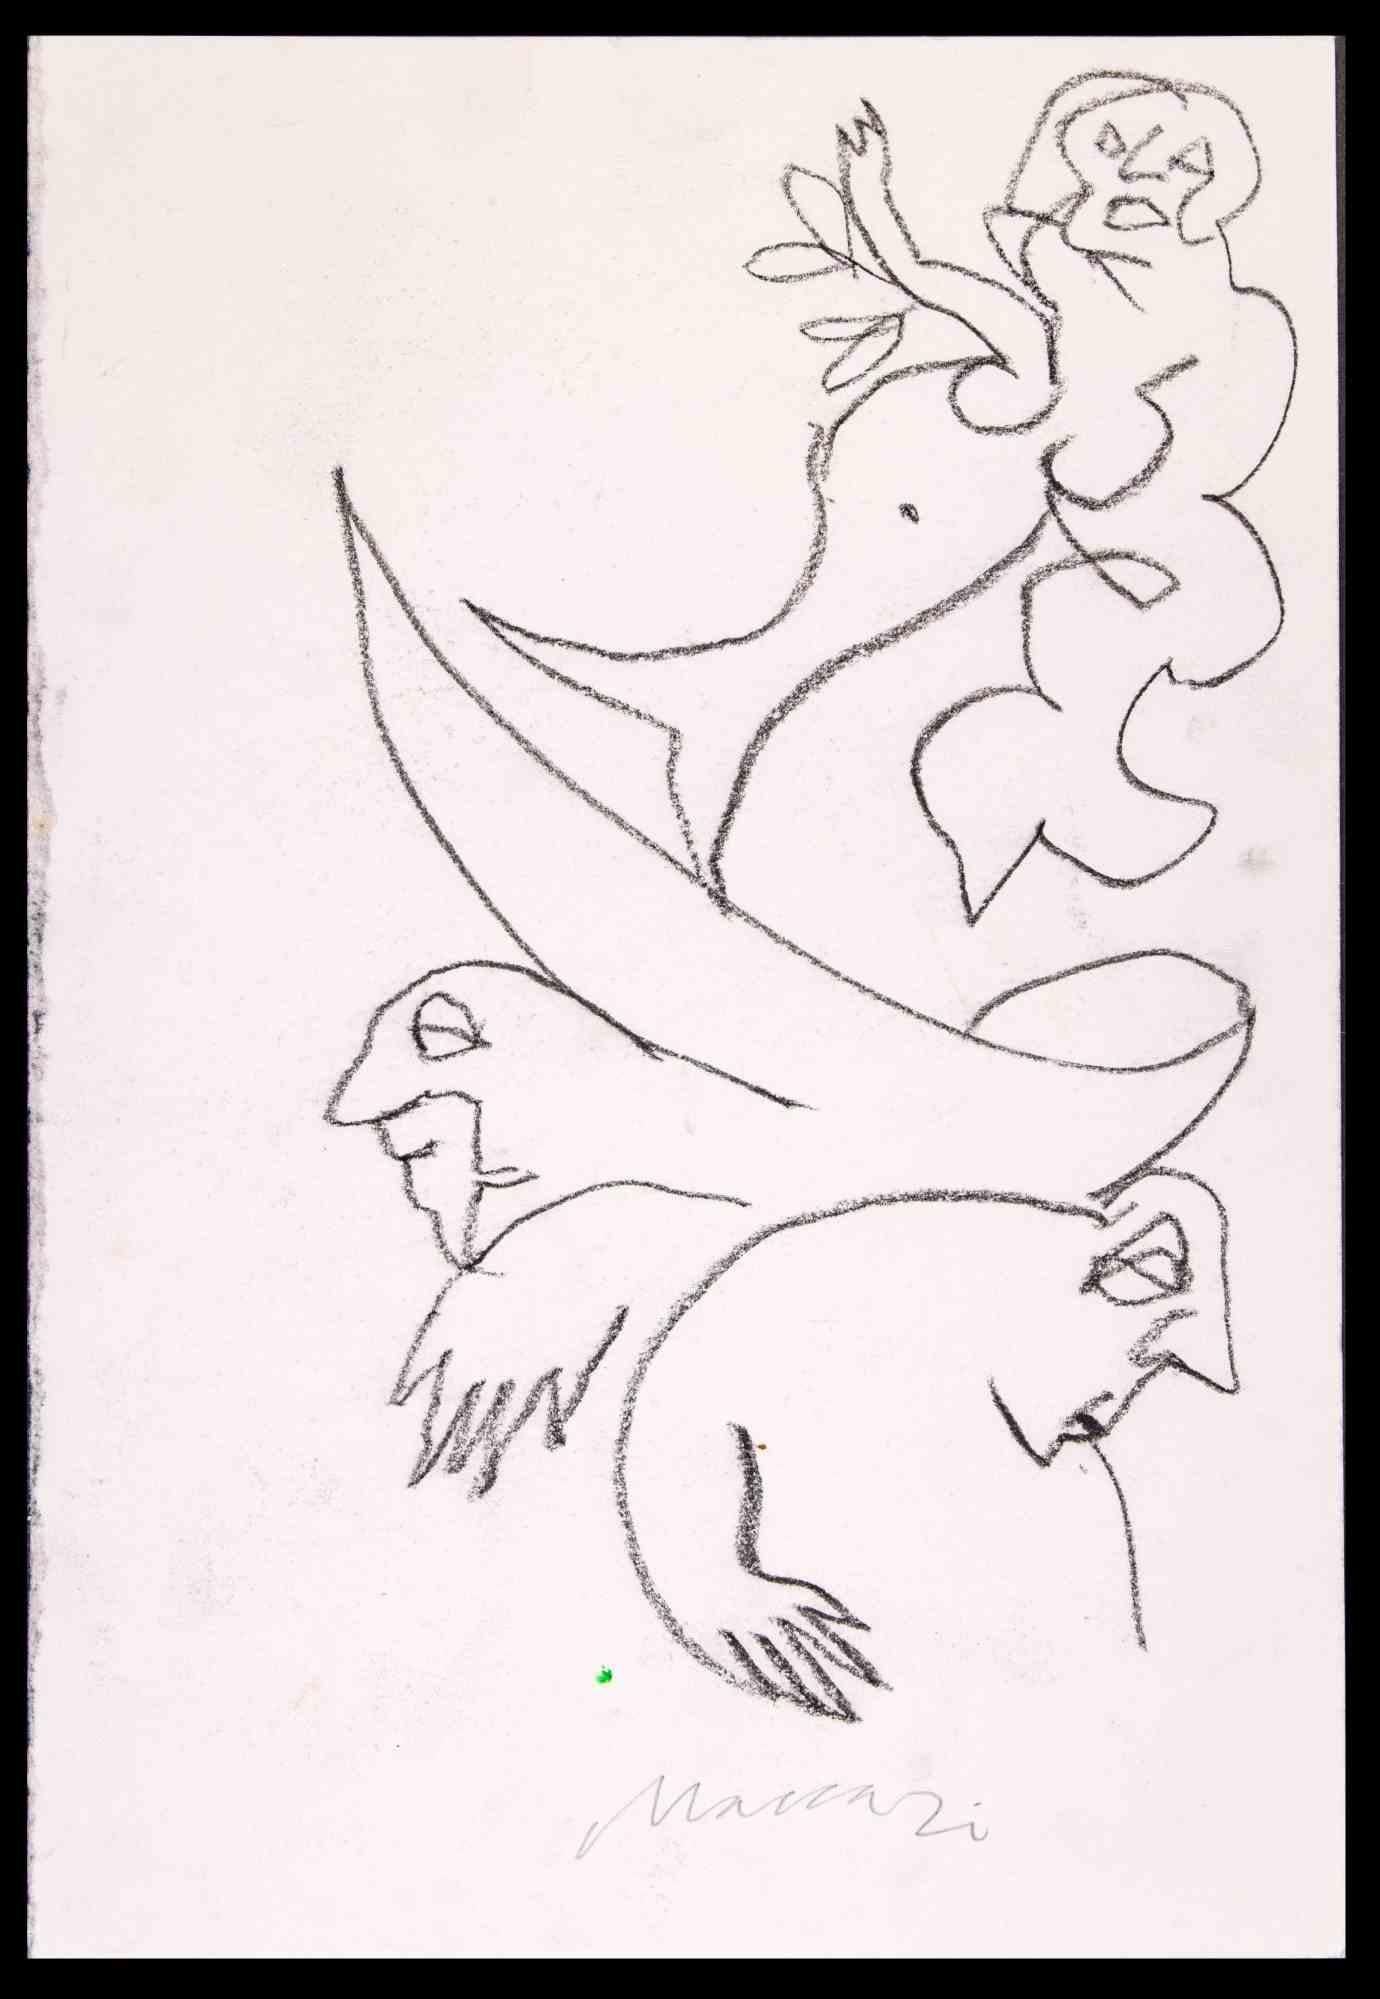 Mermaidt is a Charcoal Drawing realized by Mino Maccari (1924-1989) in 1980s.

Hand-signed on the lower margin.

Good condition on a white paper.

Mino Maccari (Siena, 1924-Rome, June 16, 1989) was an Italian writer, painter, engraver and